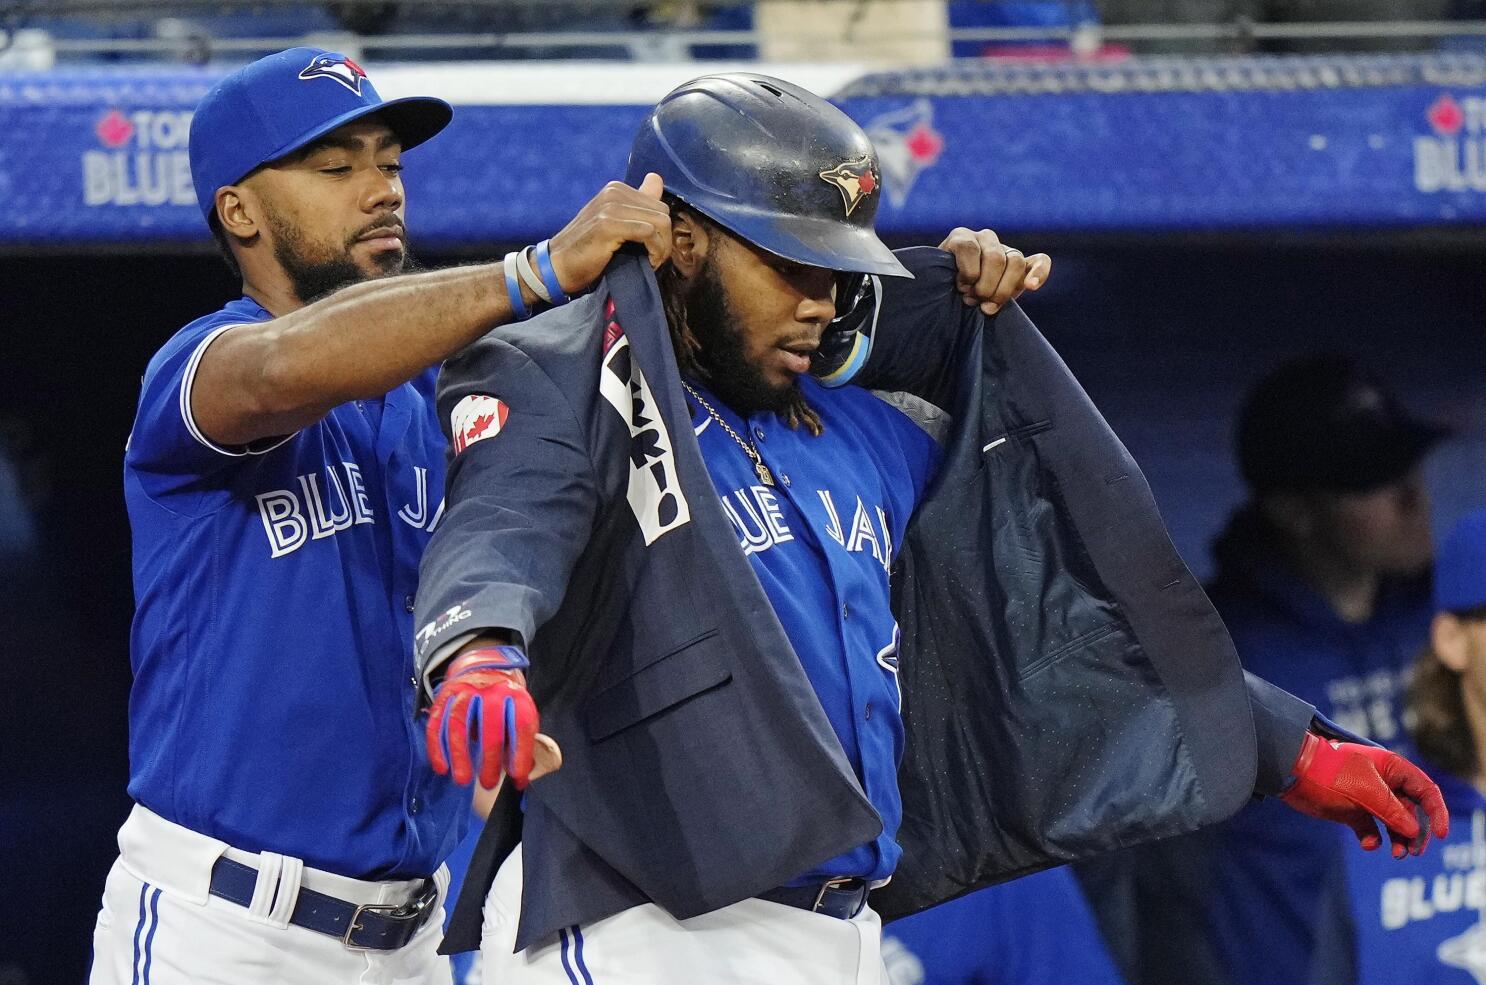 Gear up for Blue Jays season with right look